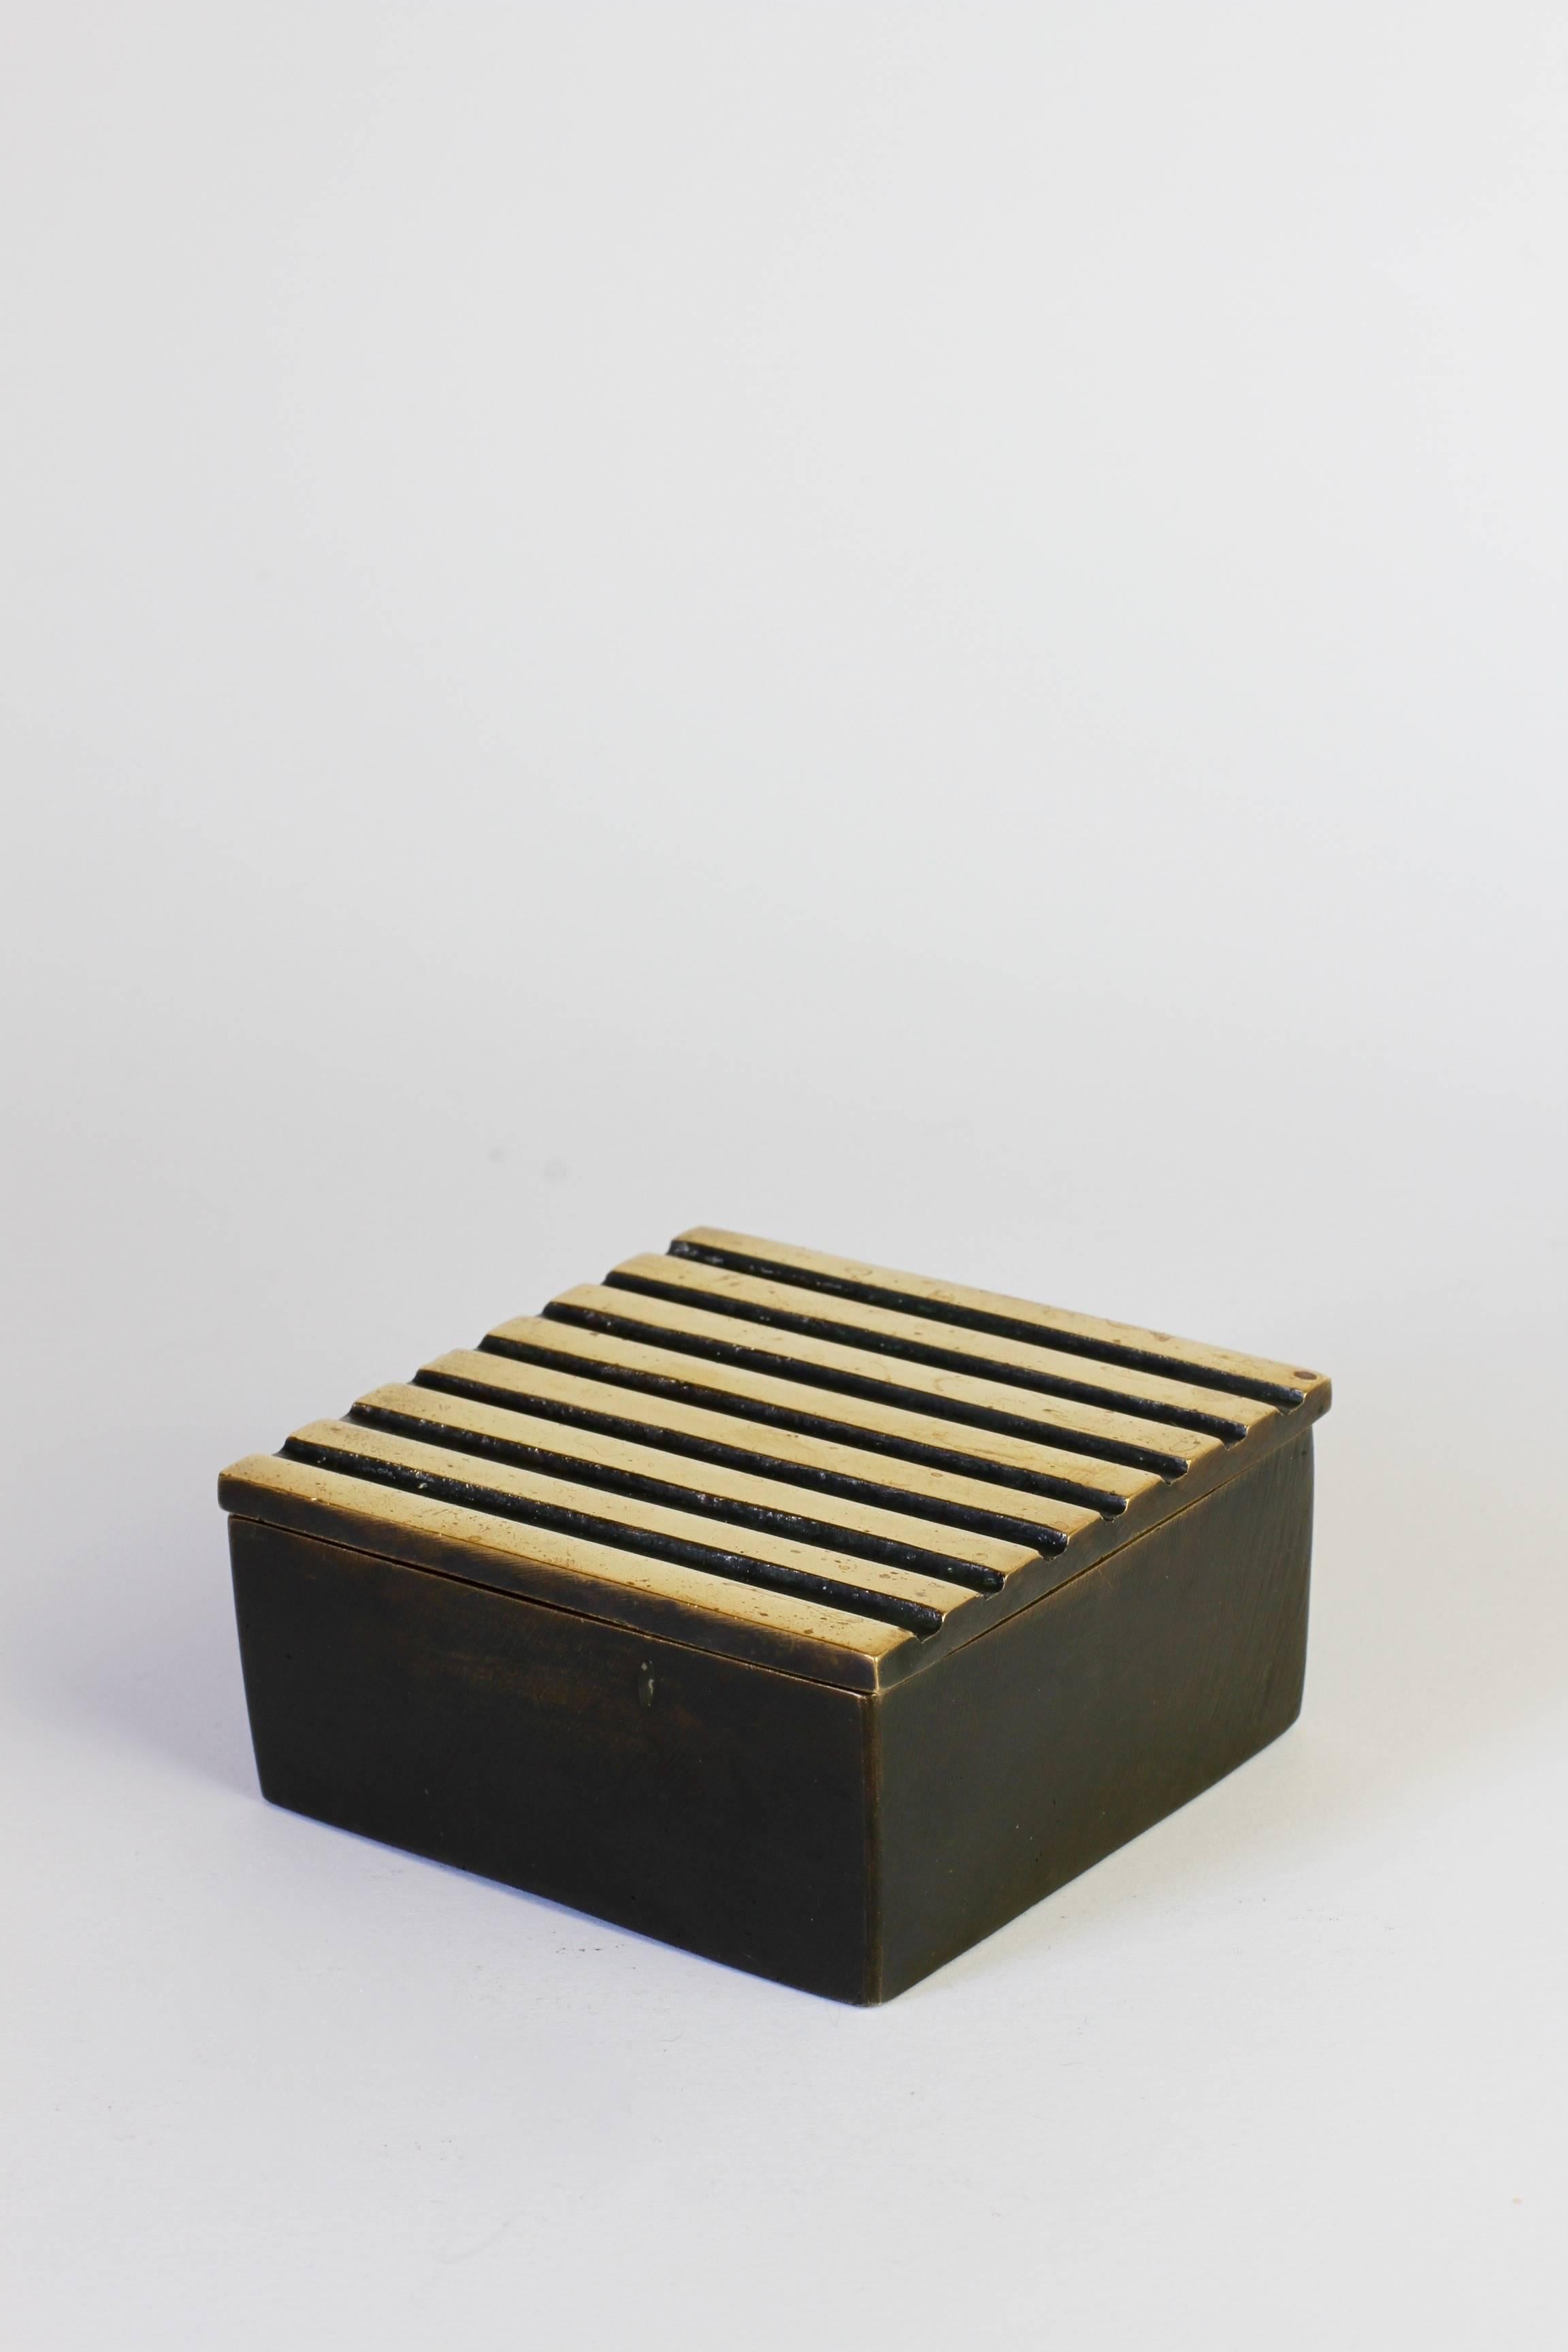 An extremely rare brass box or tin designed by Walter Bosse for storing cigarettes or tobacco in.

We have yet to find this example in any publication on Bosse's work although similar examples have been published including the matching matchbox